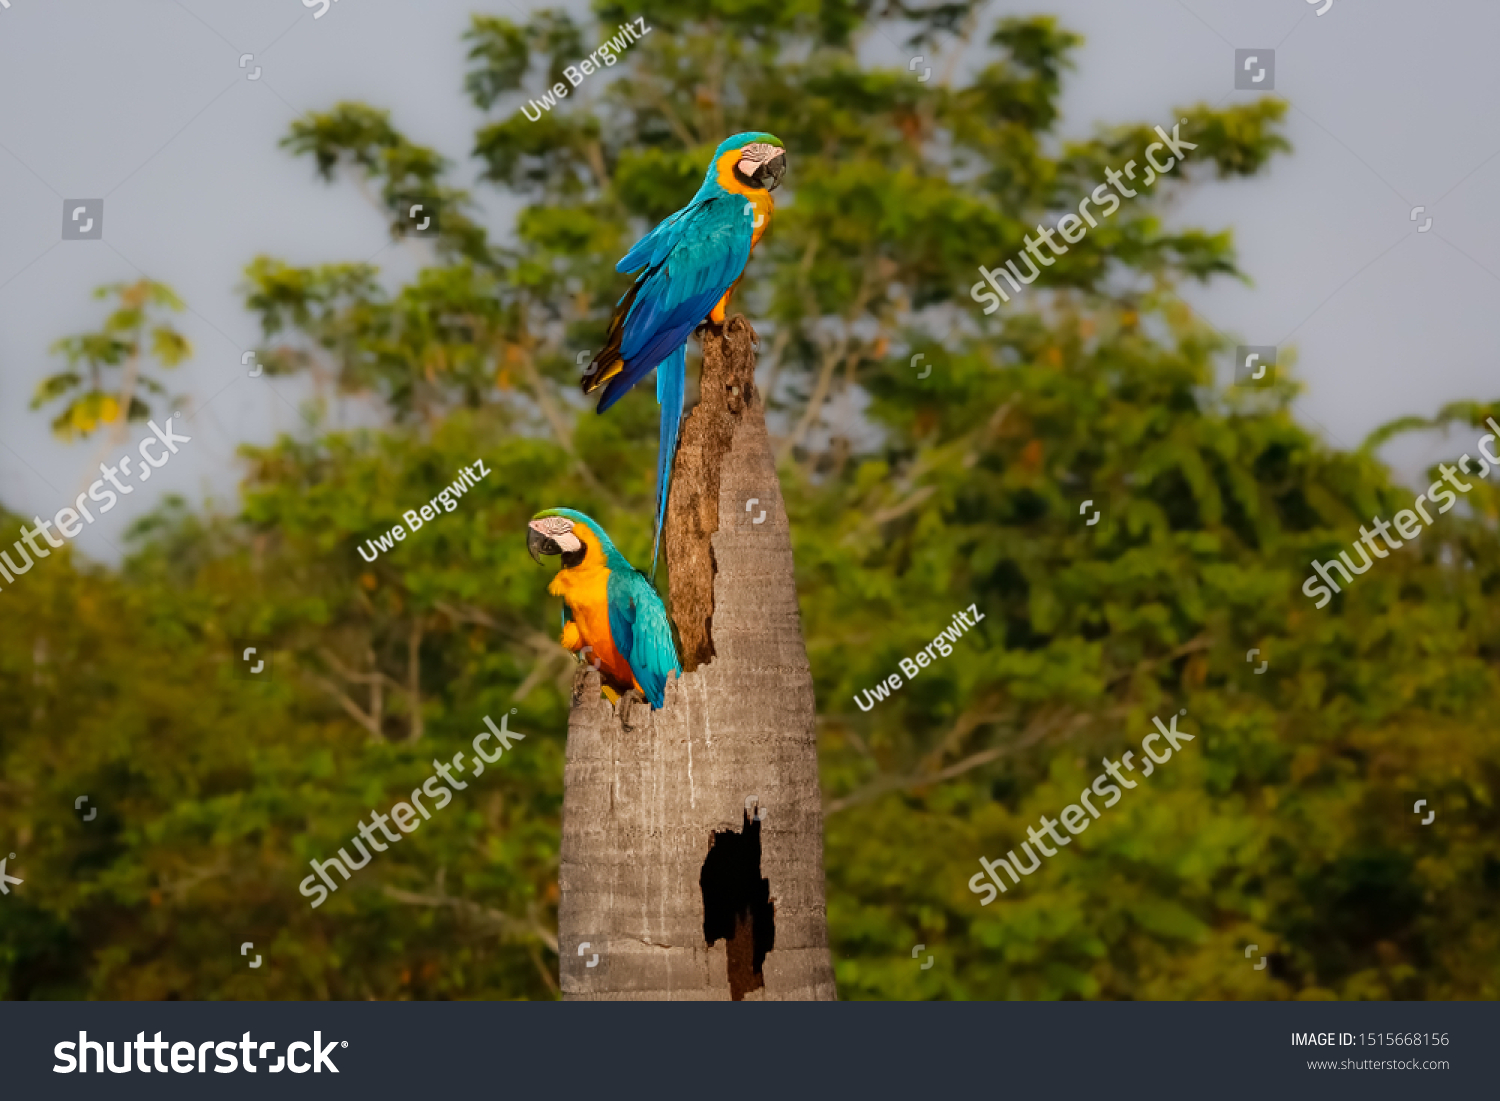 Two Blue-and-yellow macaws on a palm tree stump, looking in different directions, side view, against green defocused natural background, Amazonia, San Jose do Rio Claro, Mato Grosso, Brazil #1515668156